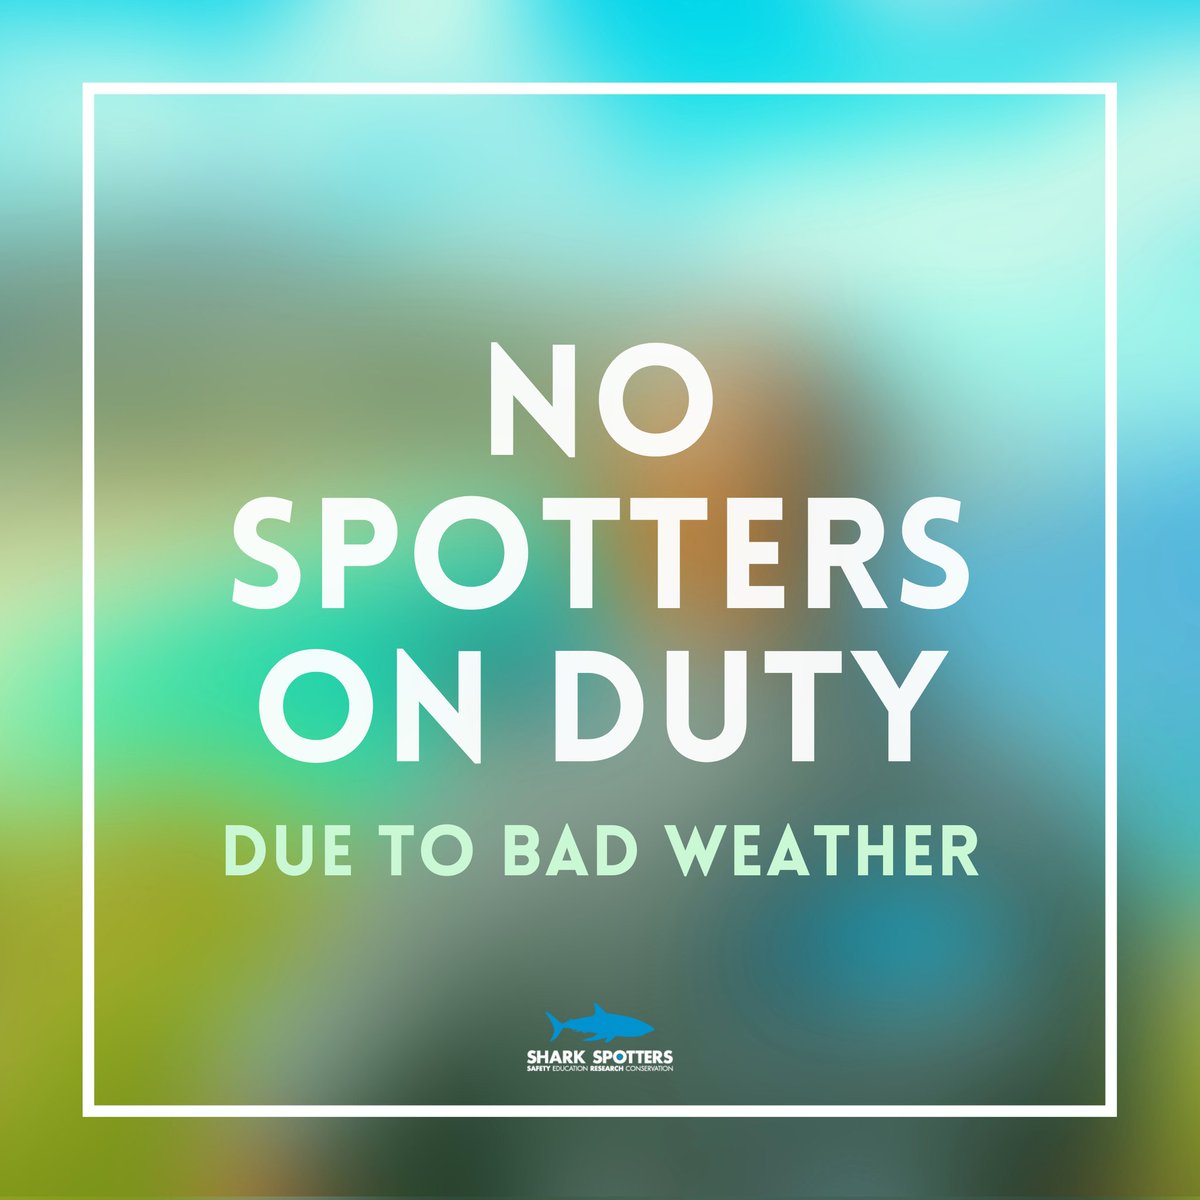 𝗔𝗧𝗧: 𝗡𝗢 𝗦𝗣𝗢𝗧𝗧𝗘𝗥𝗦 𝗢𝗡 𝗗𝗨𝗧𝗬

Please be advised that there will be no spotters on duty today, December 31, 2023, due to prevailing weather conditions.

We urge all water users to exercise caution and ensure their safety while in the water.

#BeSharkSmart